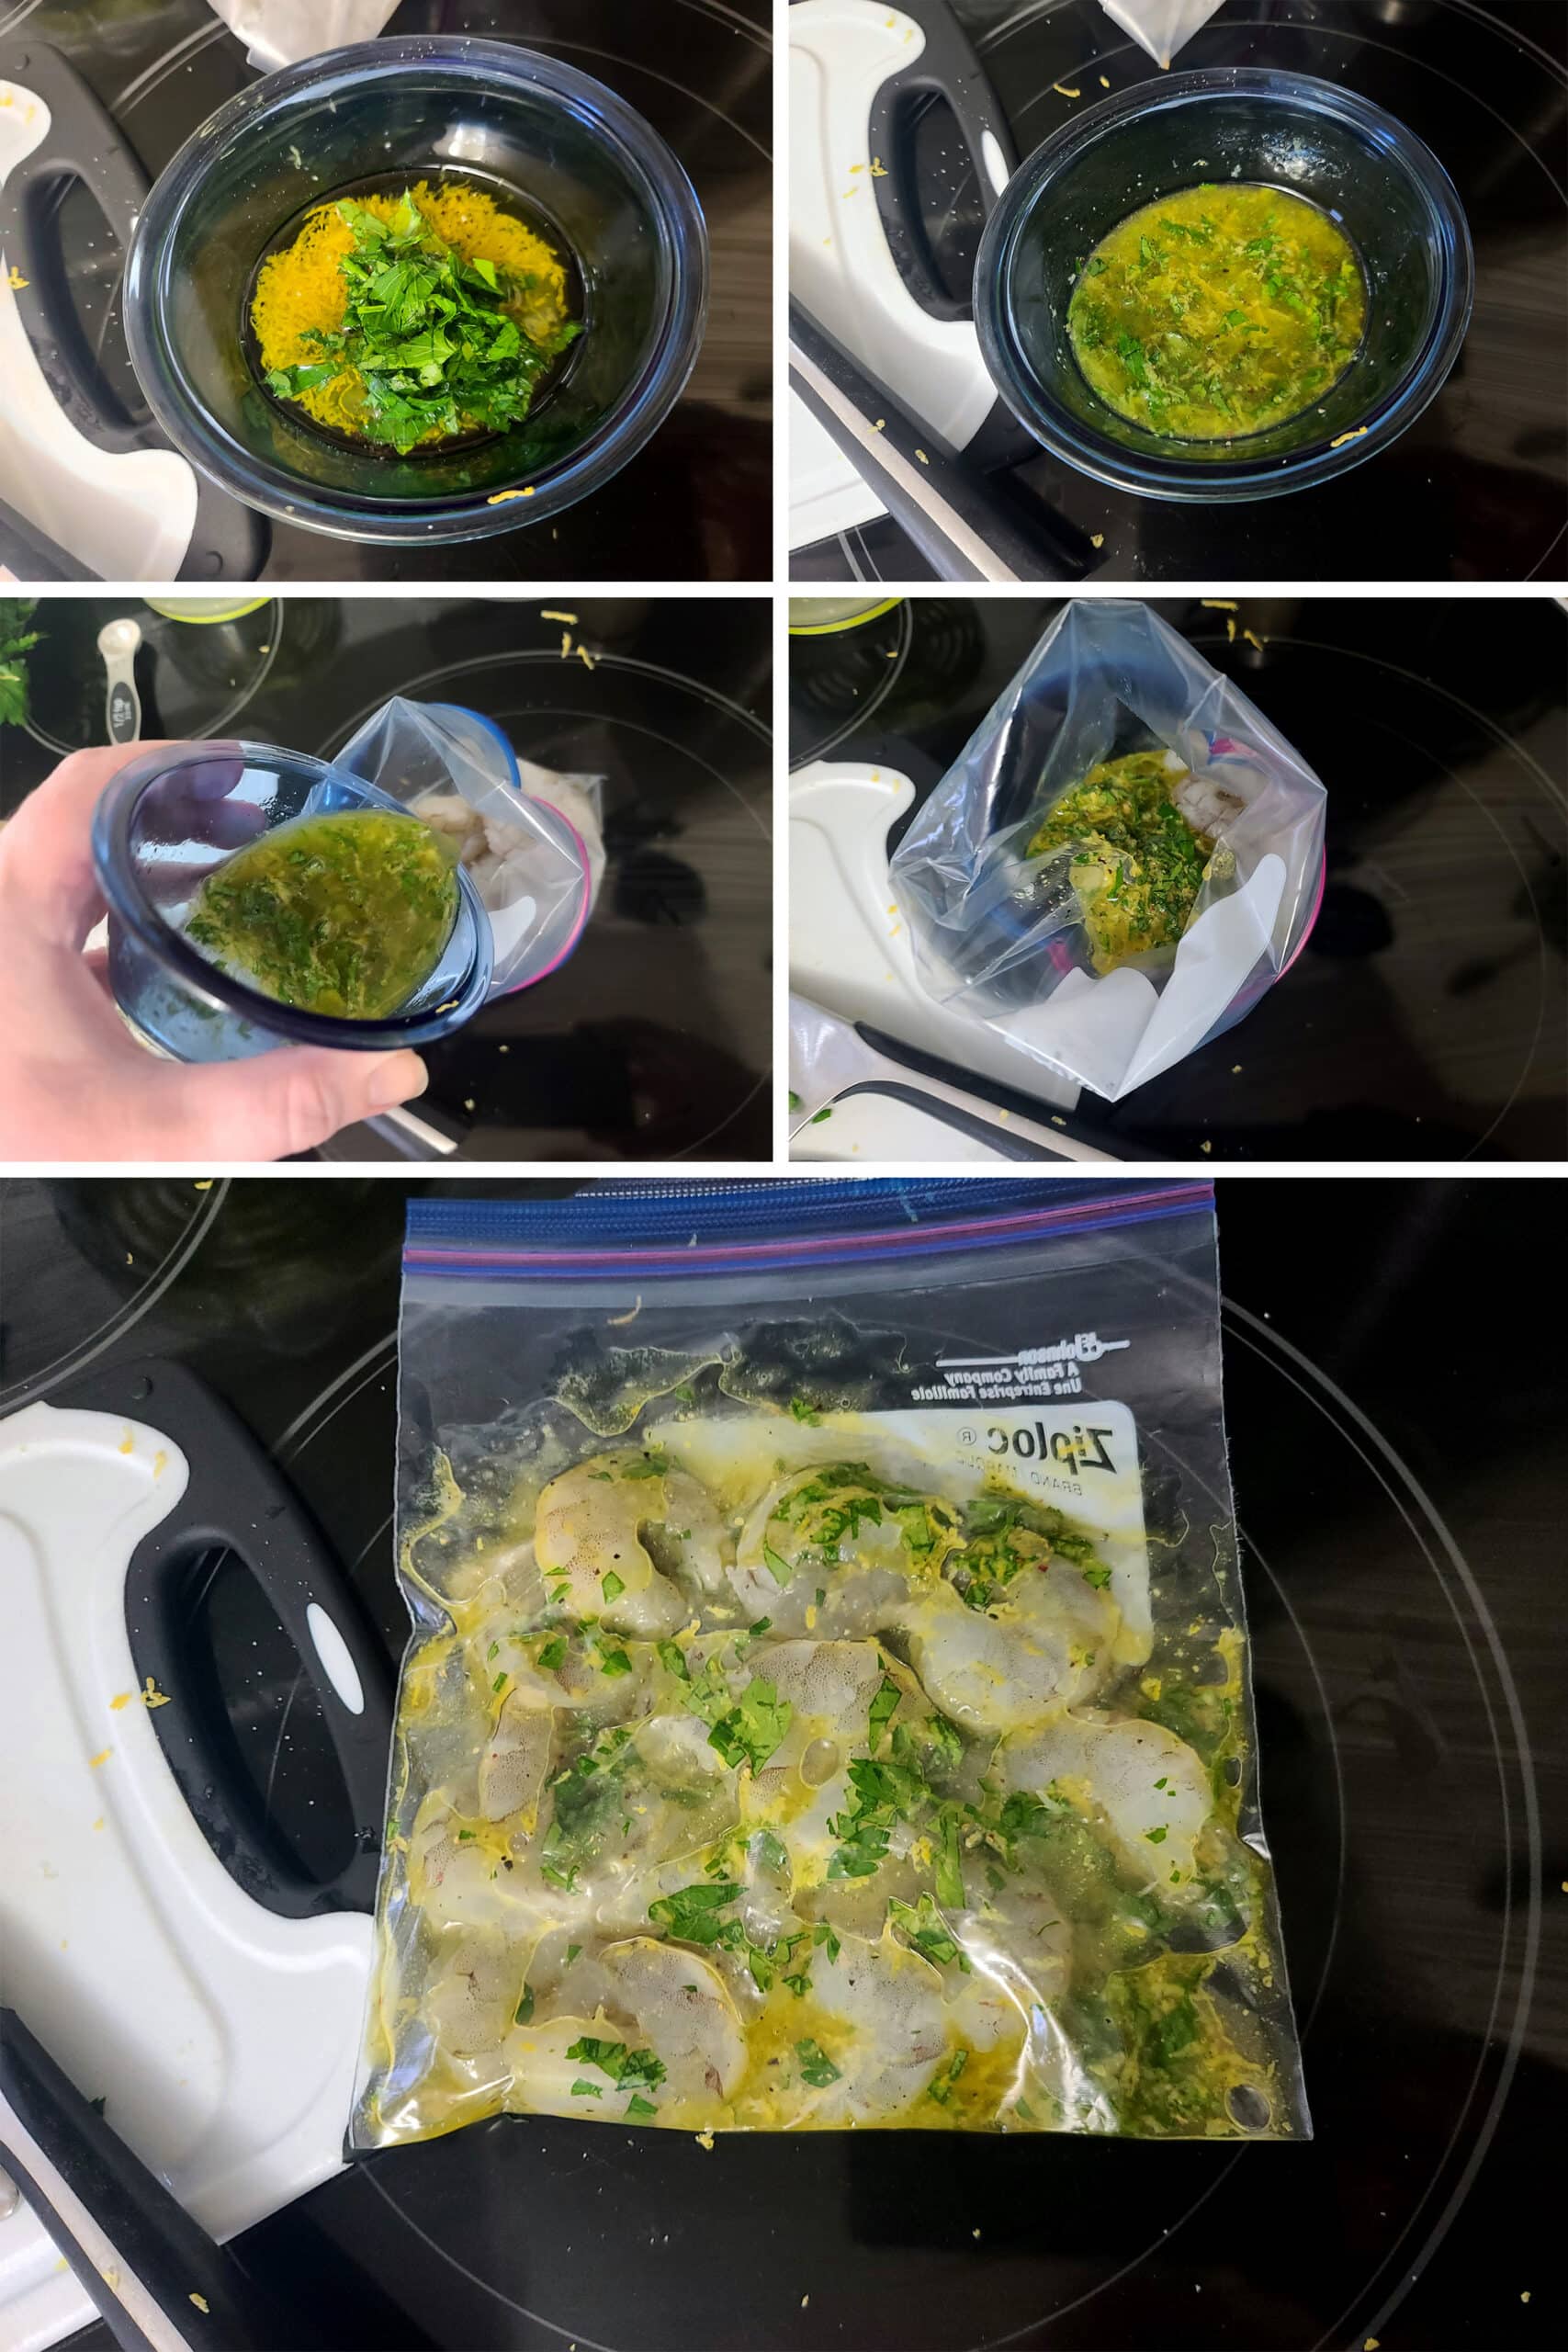 A 5 part image showing the lemon garlic marinade being mixed and poured in the baggie of shrimp.